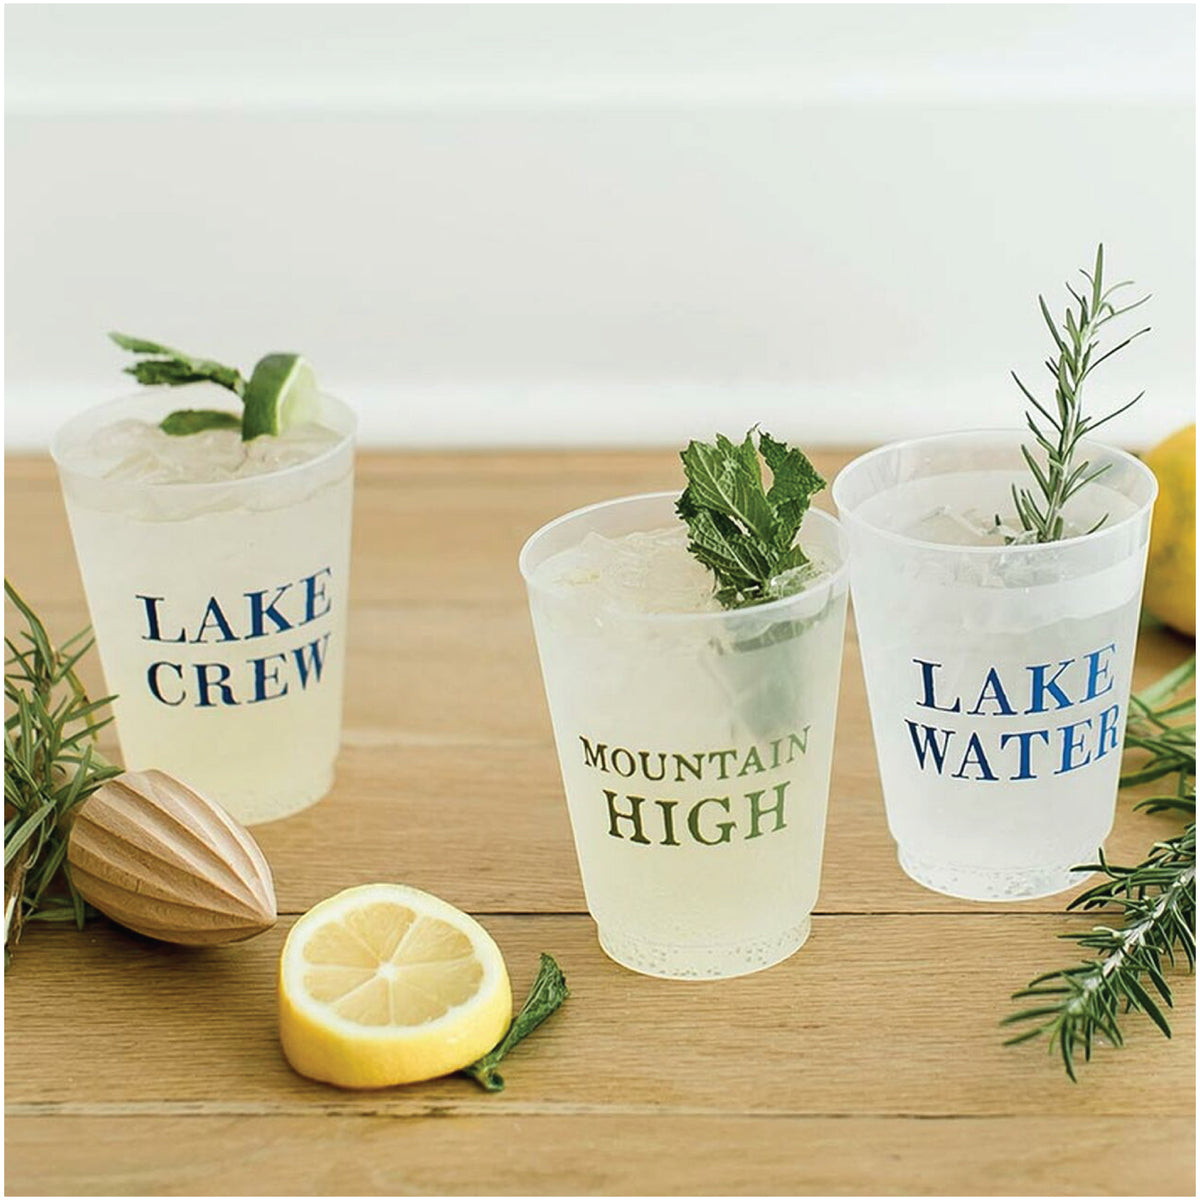 Little Fisherman BPA-Free Plastic Cups with Lids & Straws - 8 Ct.